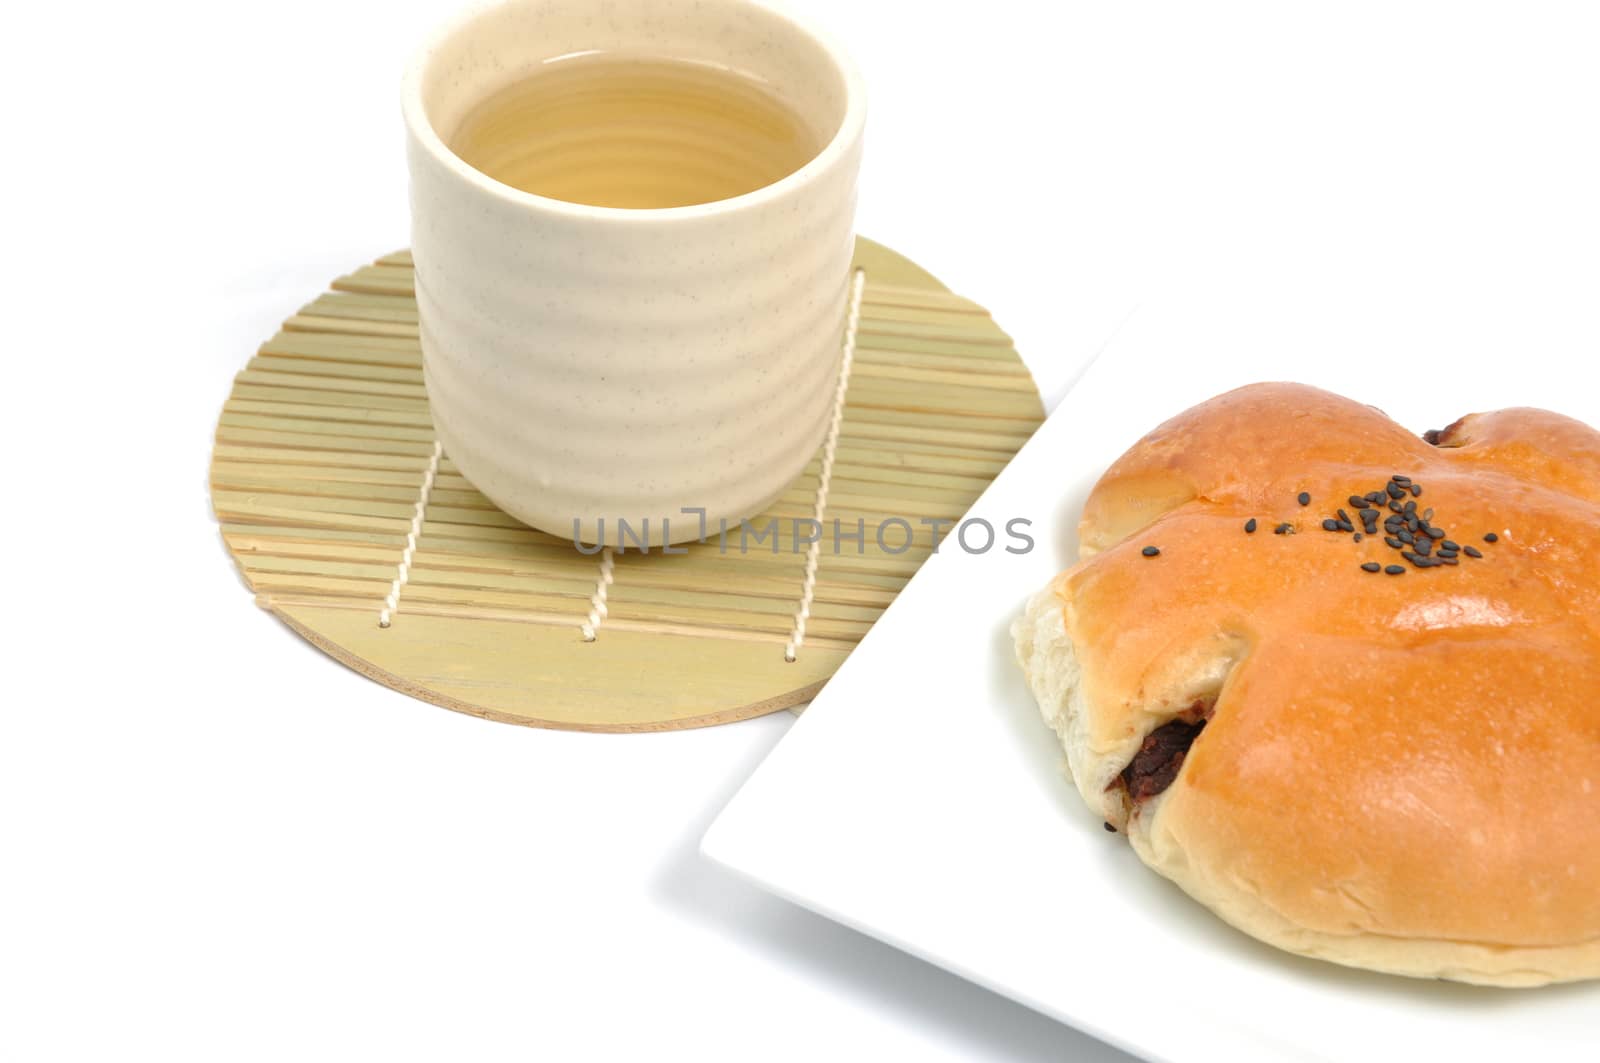 Green tea and red bean bread